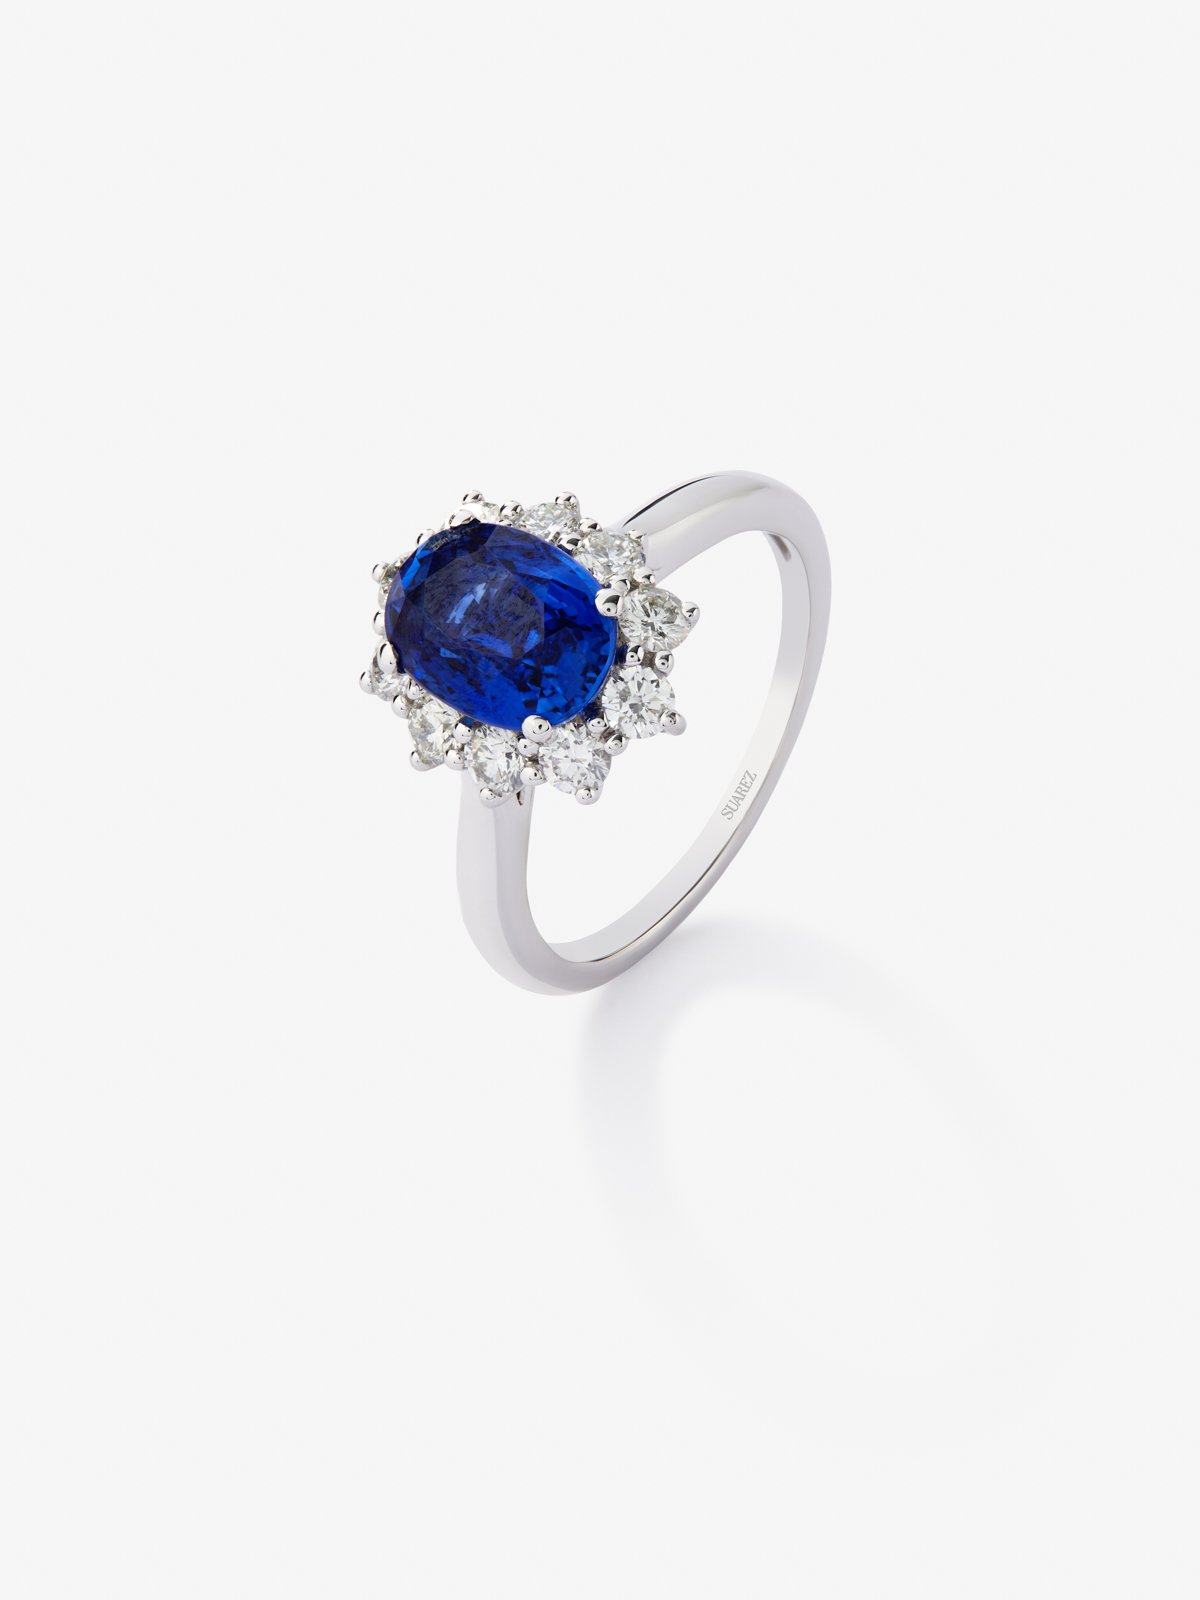 18K White Gold Ring with Azul Blue Saber